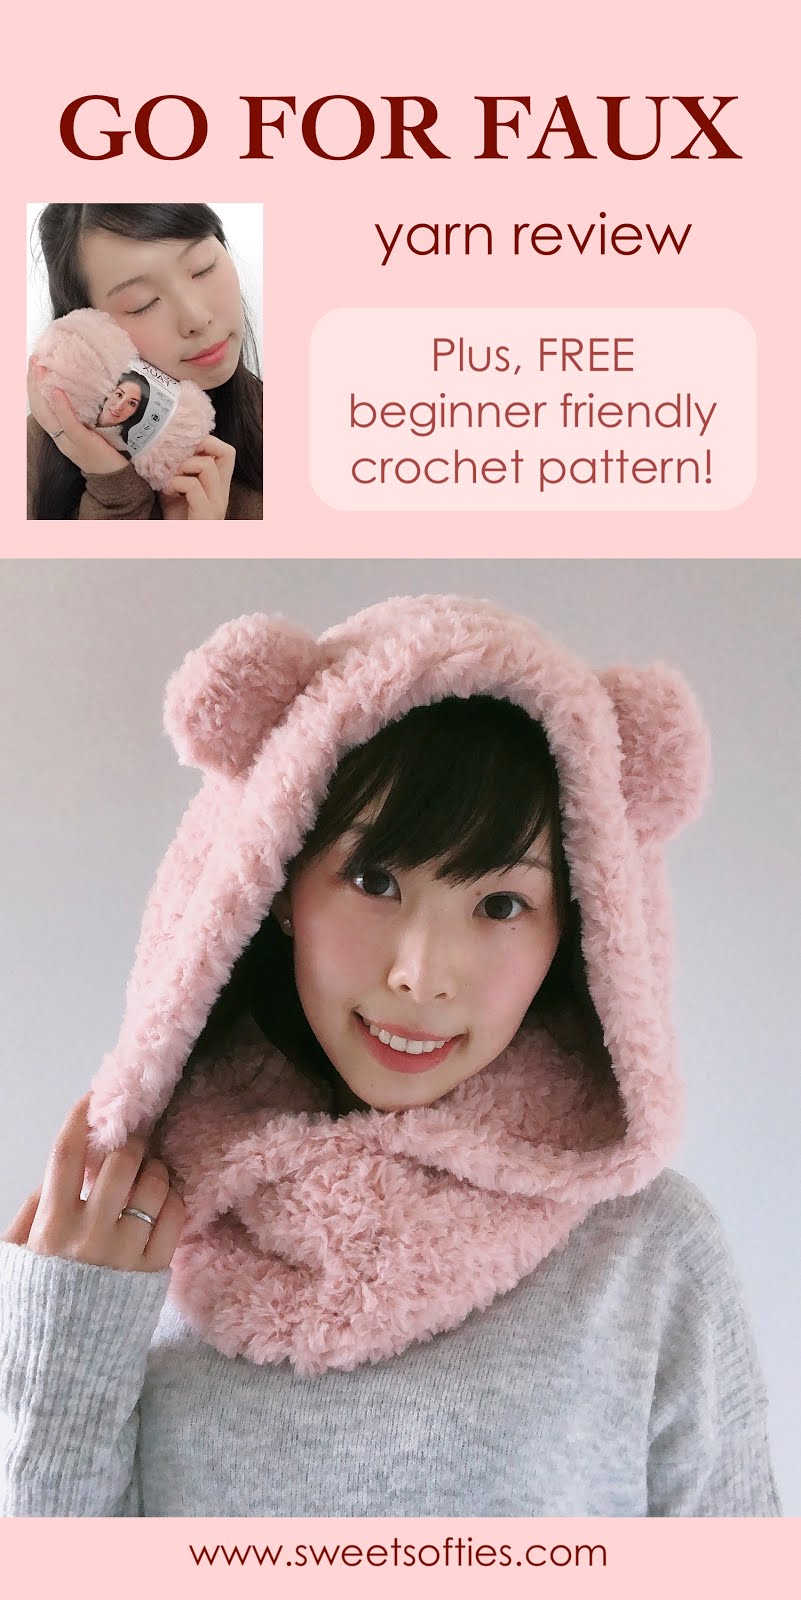 6 Tips for Working and Crocheting With Faux Fur Yarn